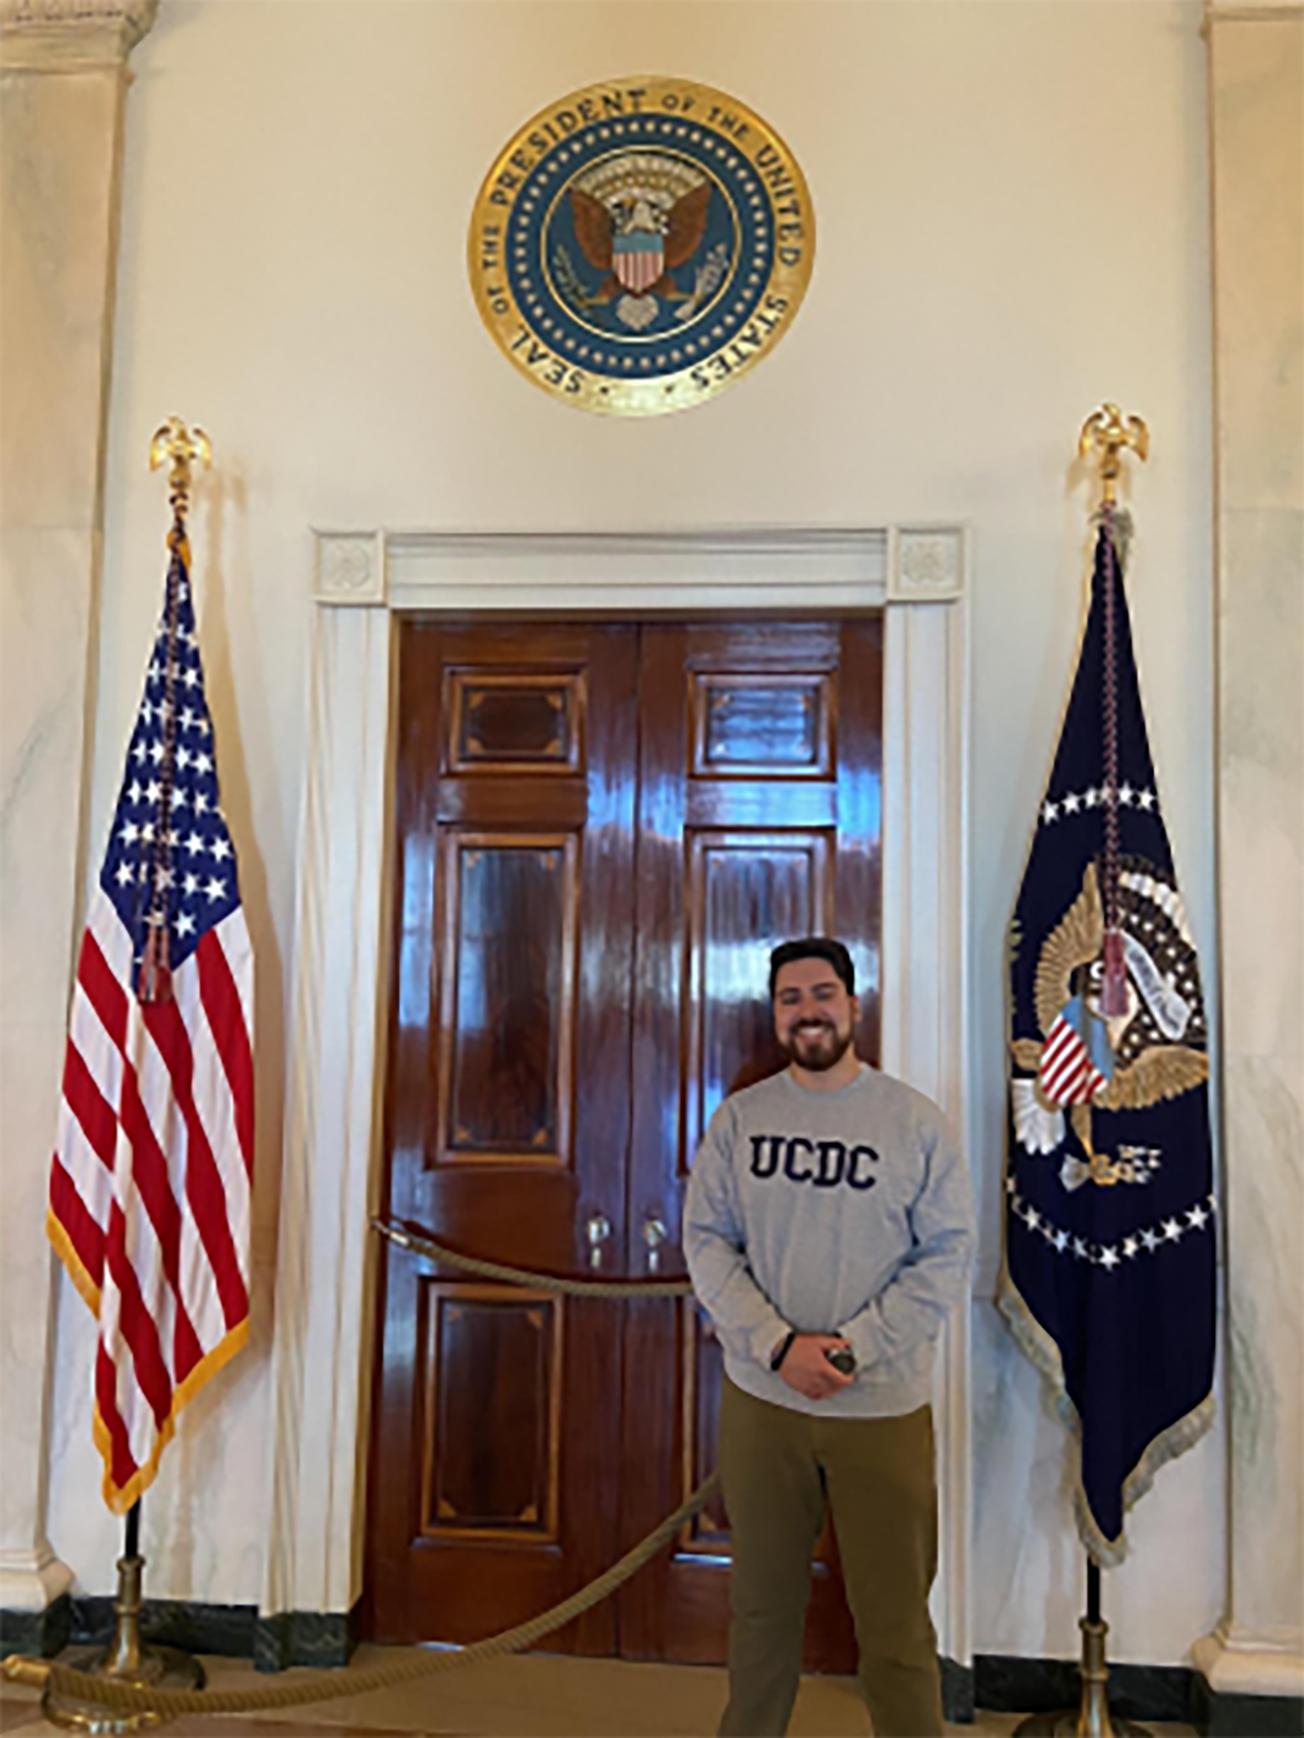 Spring 2023 UCDC Fellow Nathan Jauregui standing in front of a door with the seal of the US President